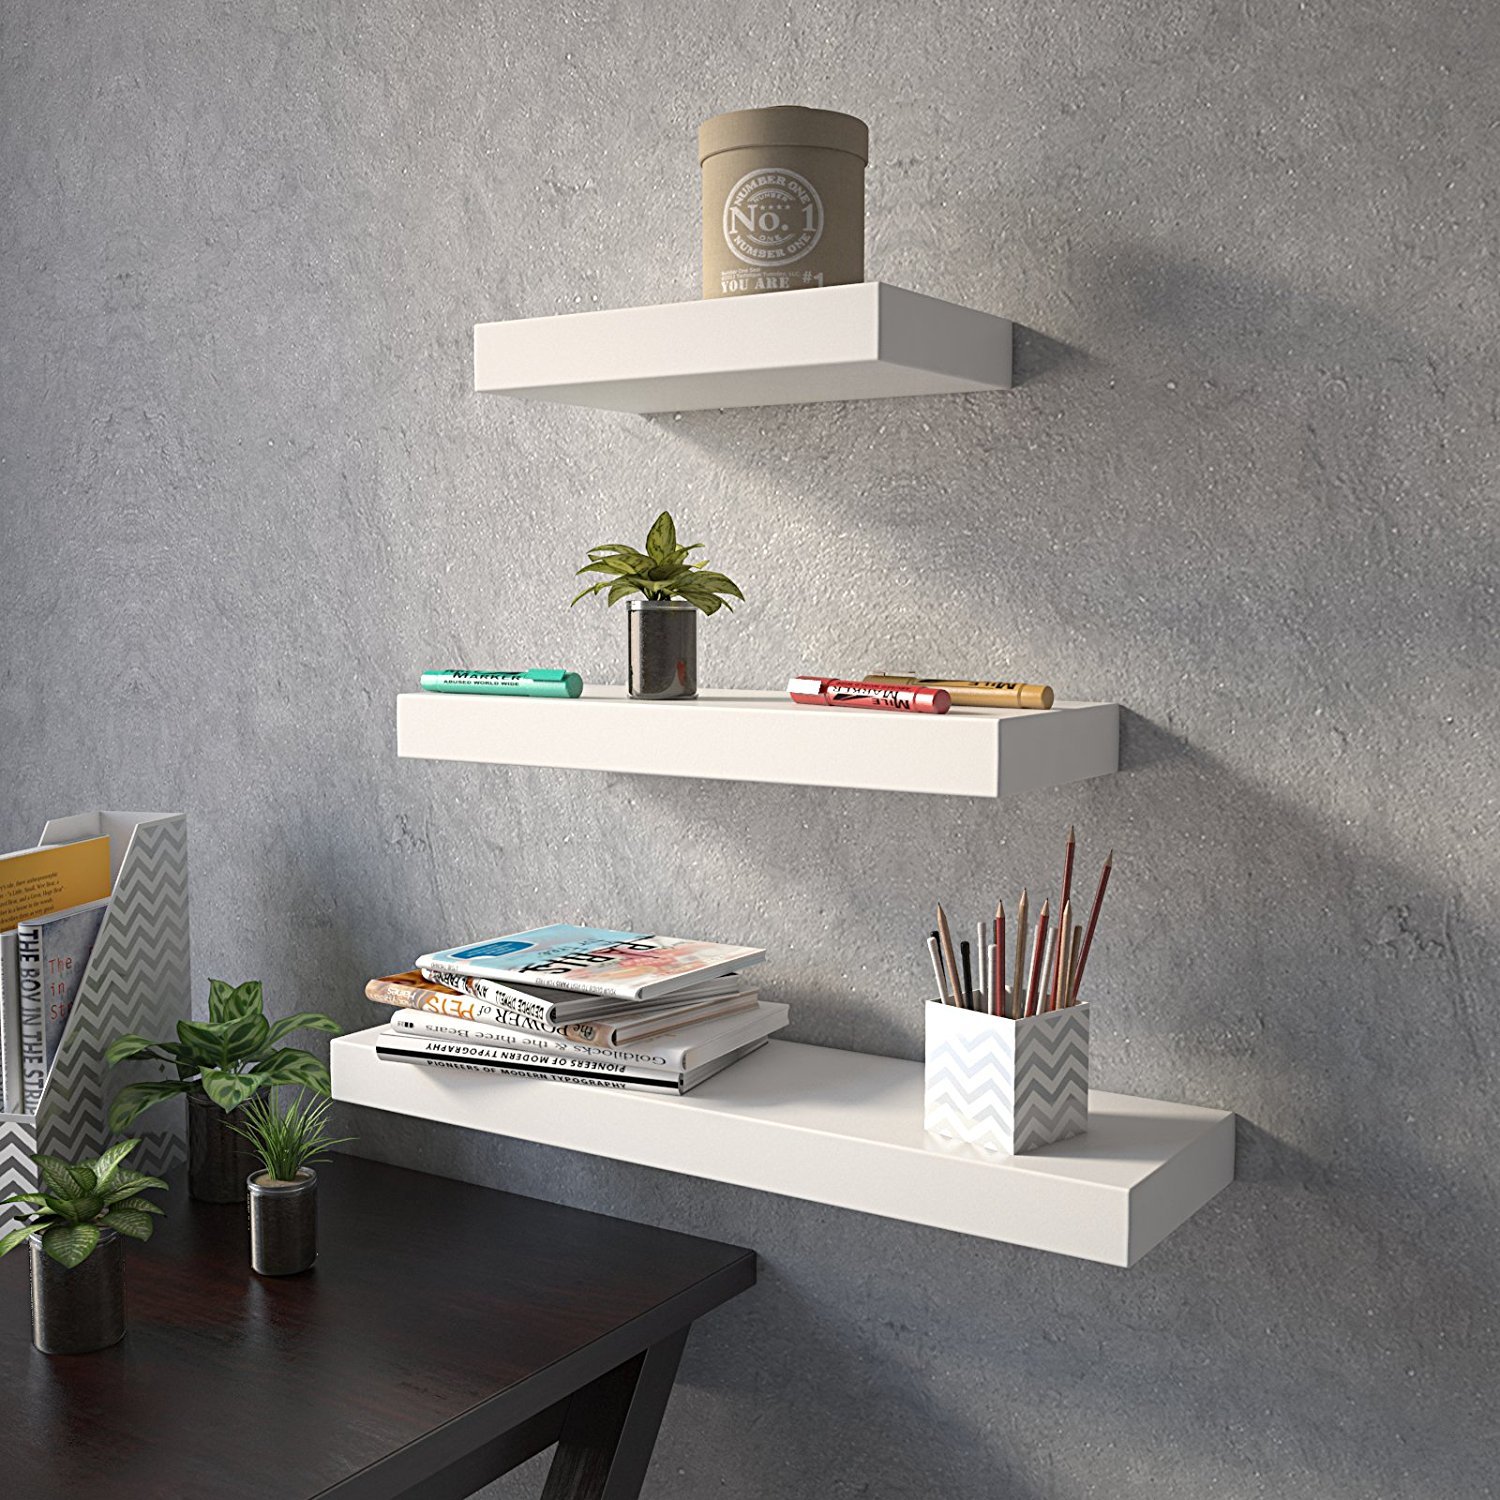 Set Of 3 (24x7IN 18x7IN 12x7IN) Floating Wall Shelves for Storage & Shelves  – White